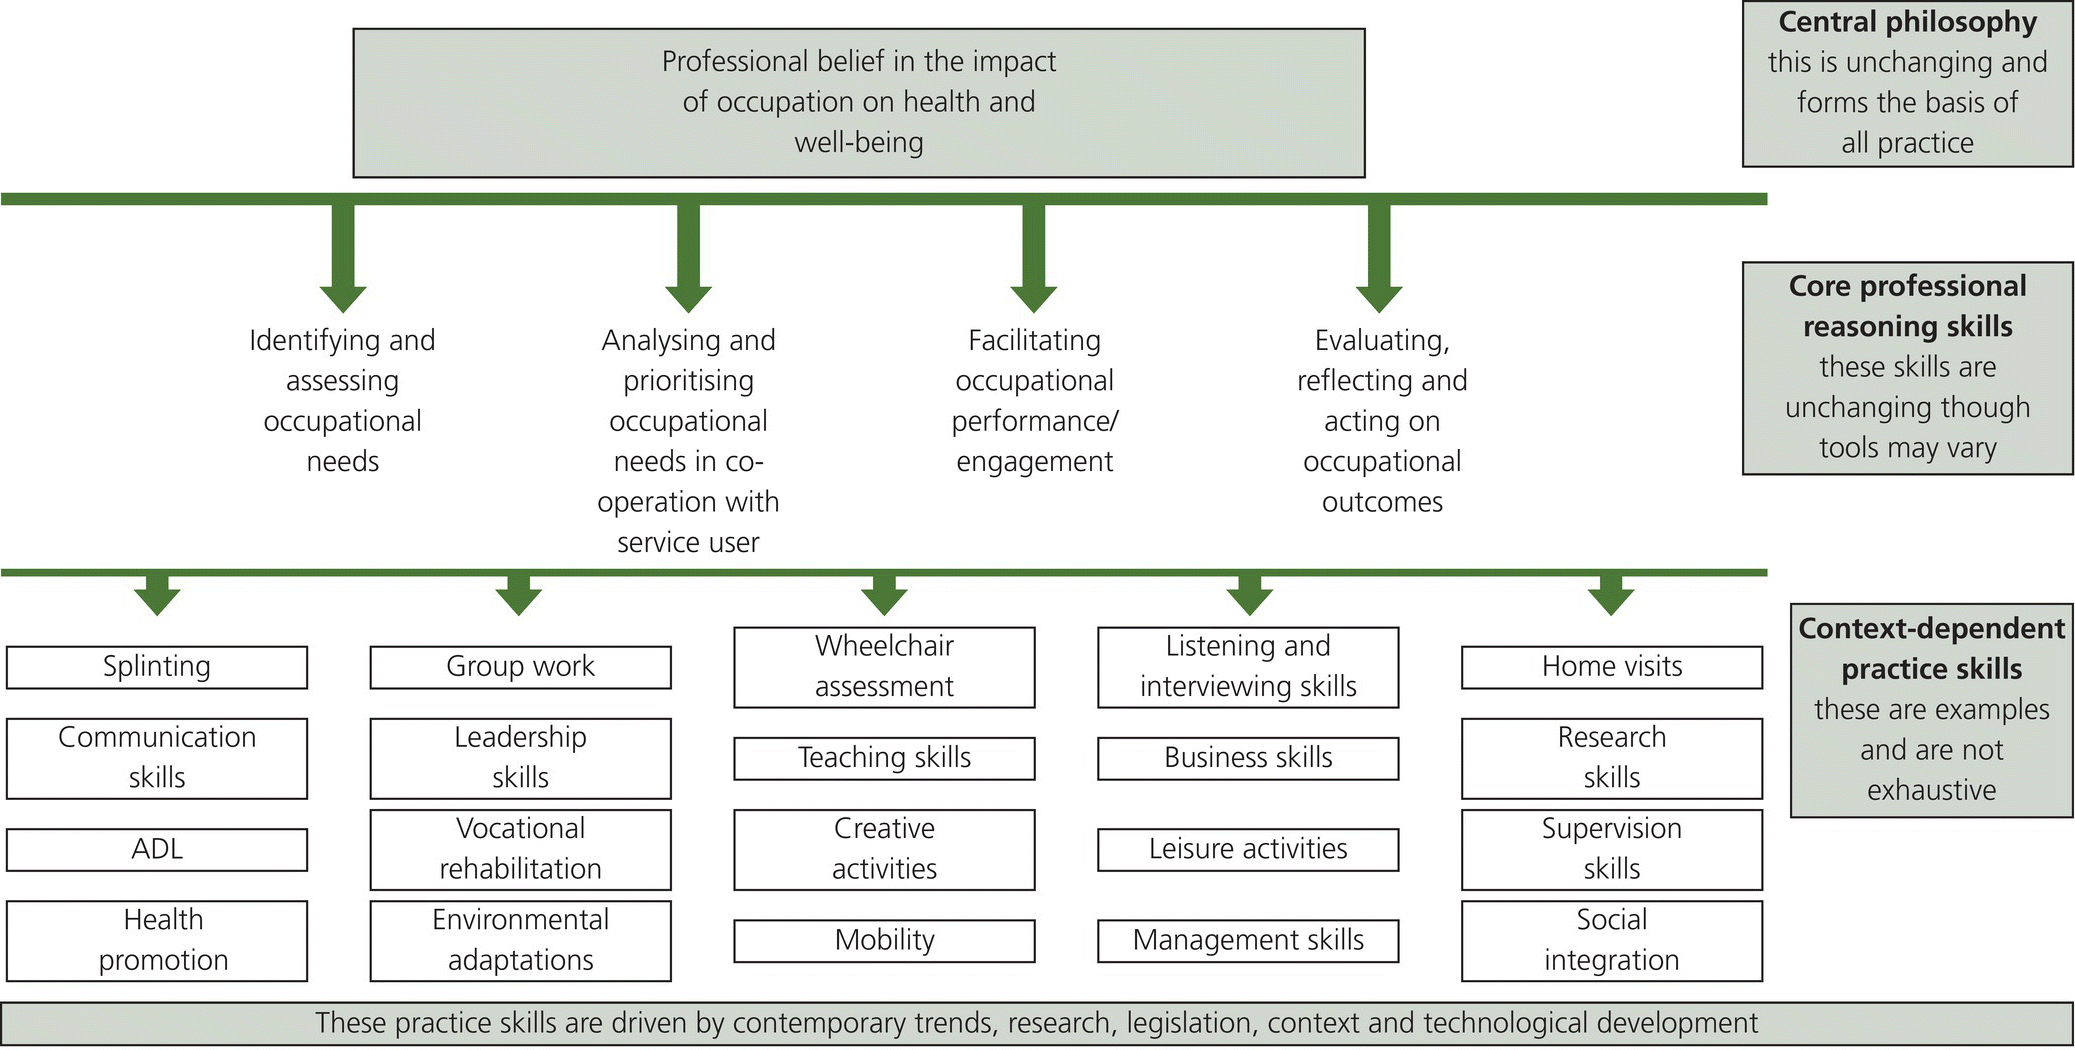 Diagram with arrows from the central philosophy of occupation on health and well-being to core professional reasoning skills to context-dependent practice skills.